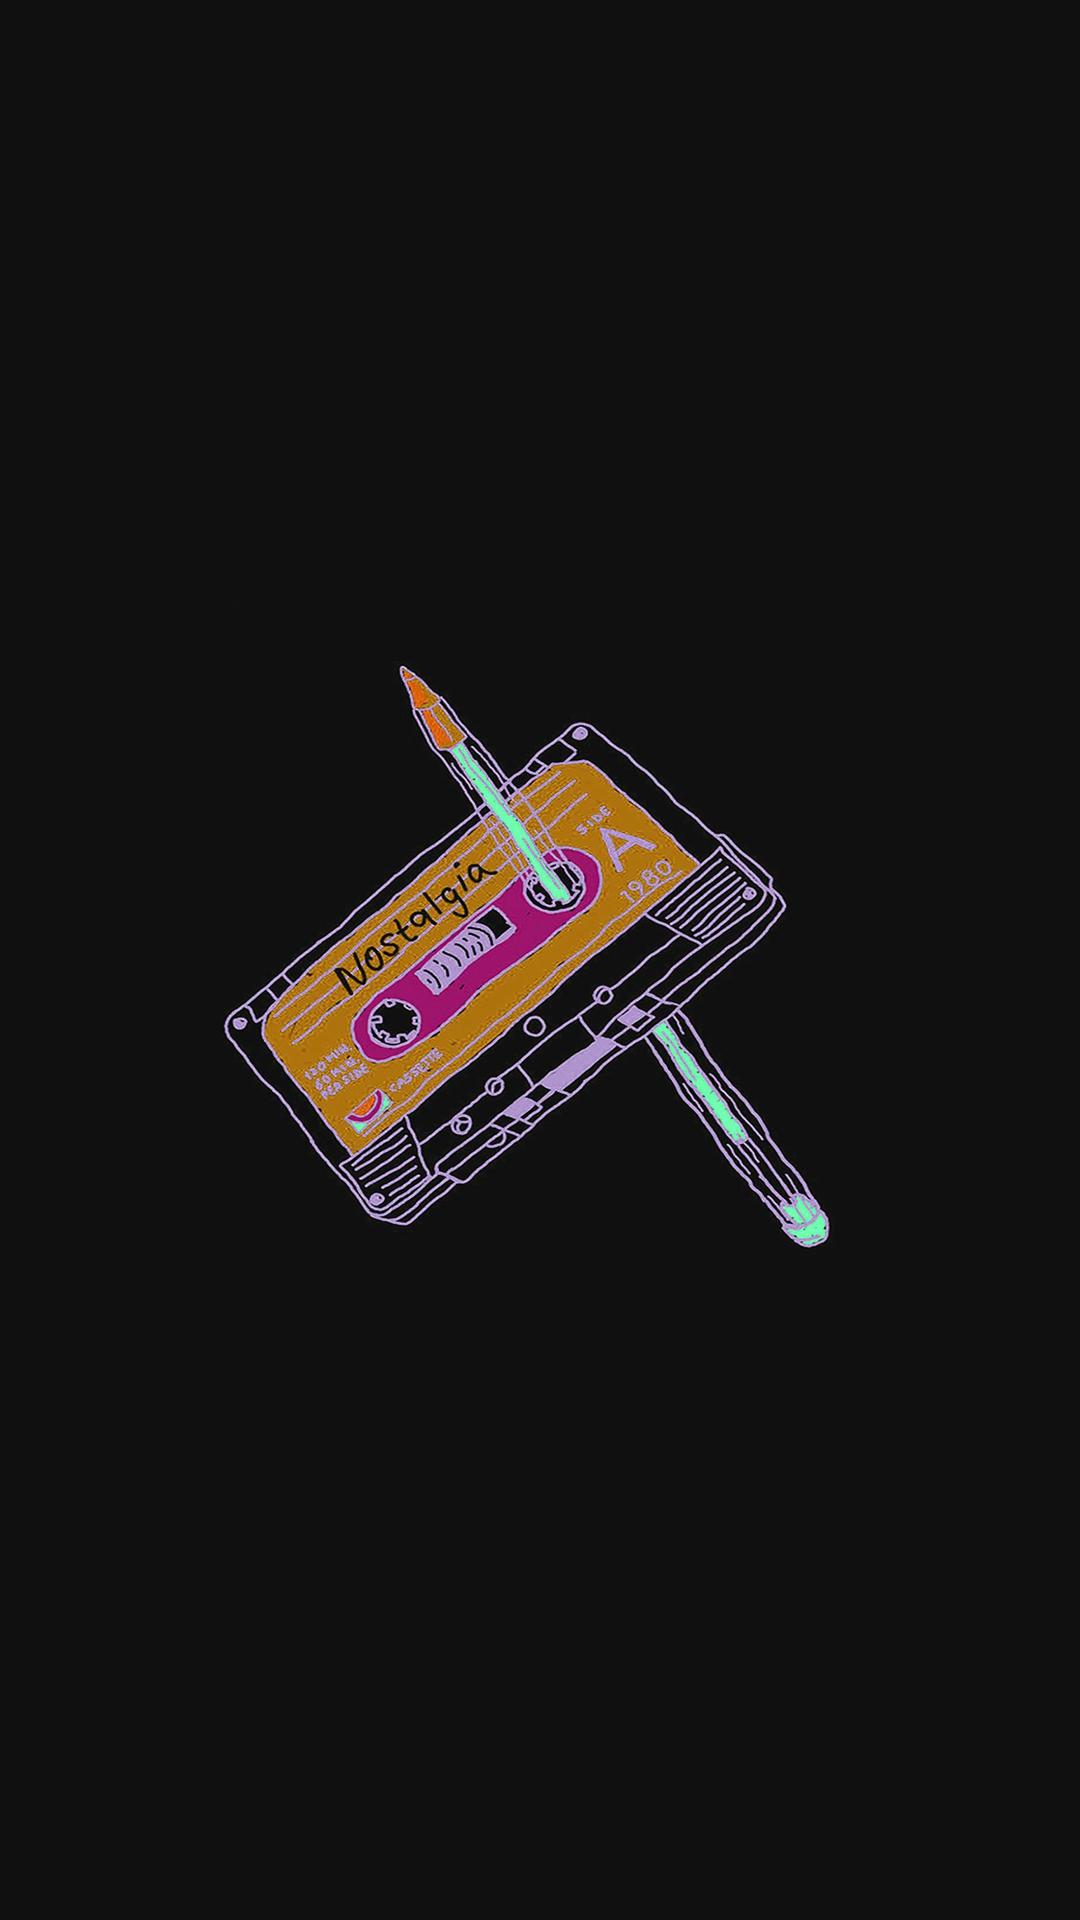 Cassette tape old iPhone 8 Wallpaper Free Download